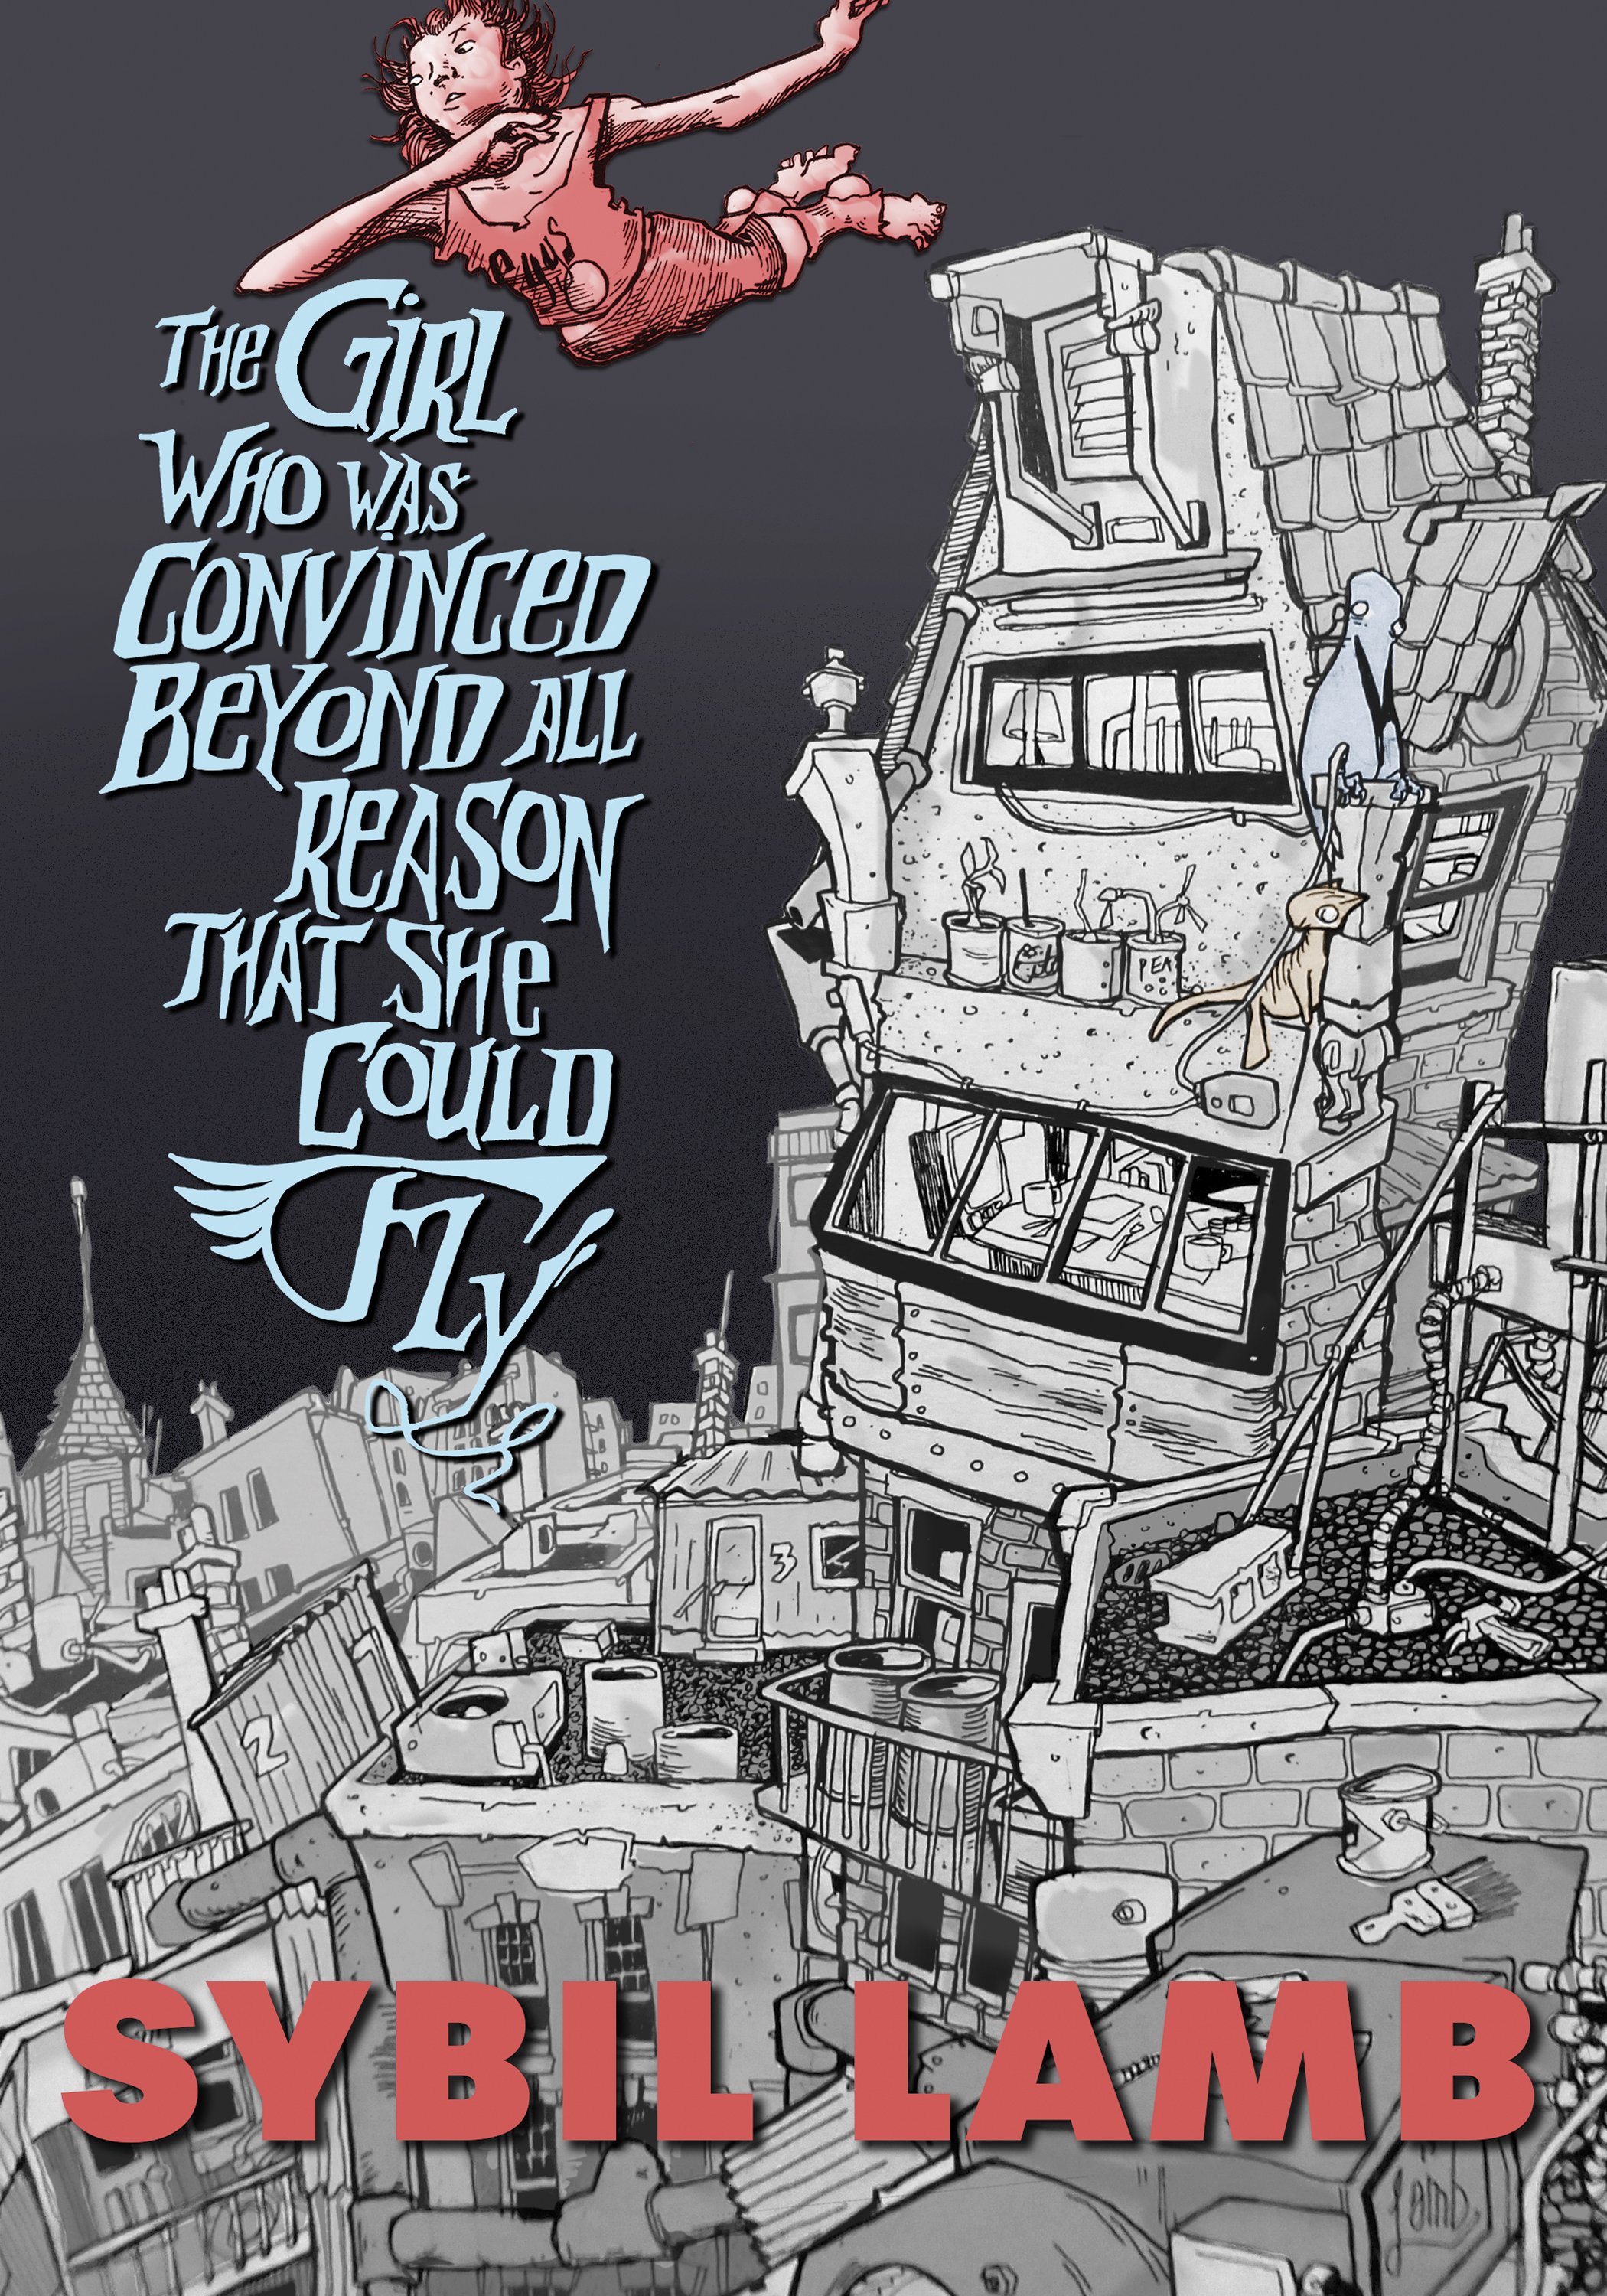 The cover of "The Girl Who Was Convinced Beyond All Reason That She Could Fly."